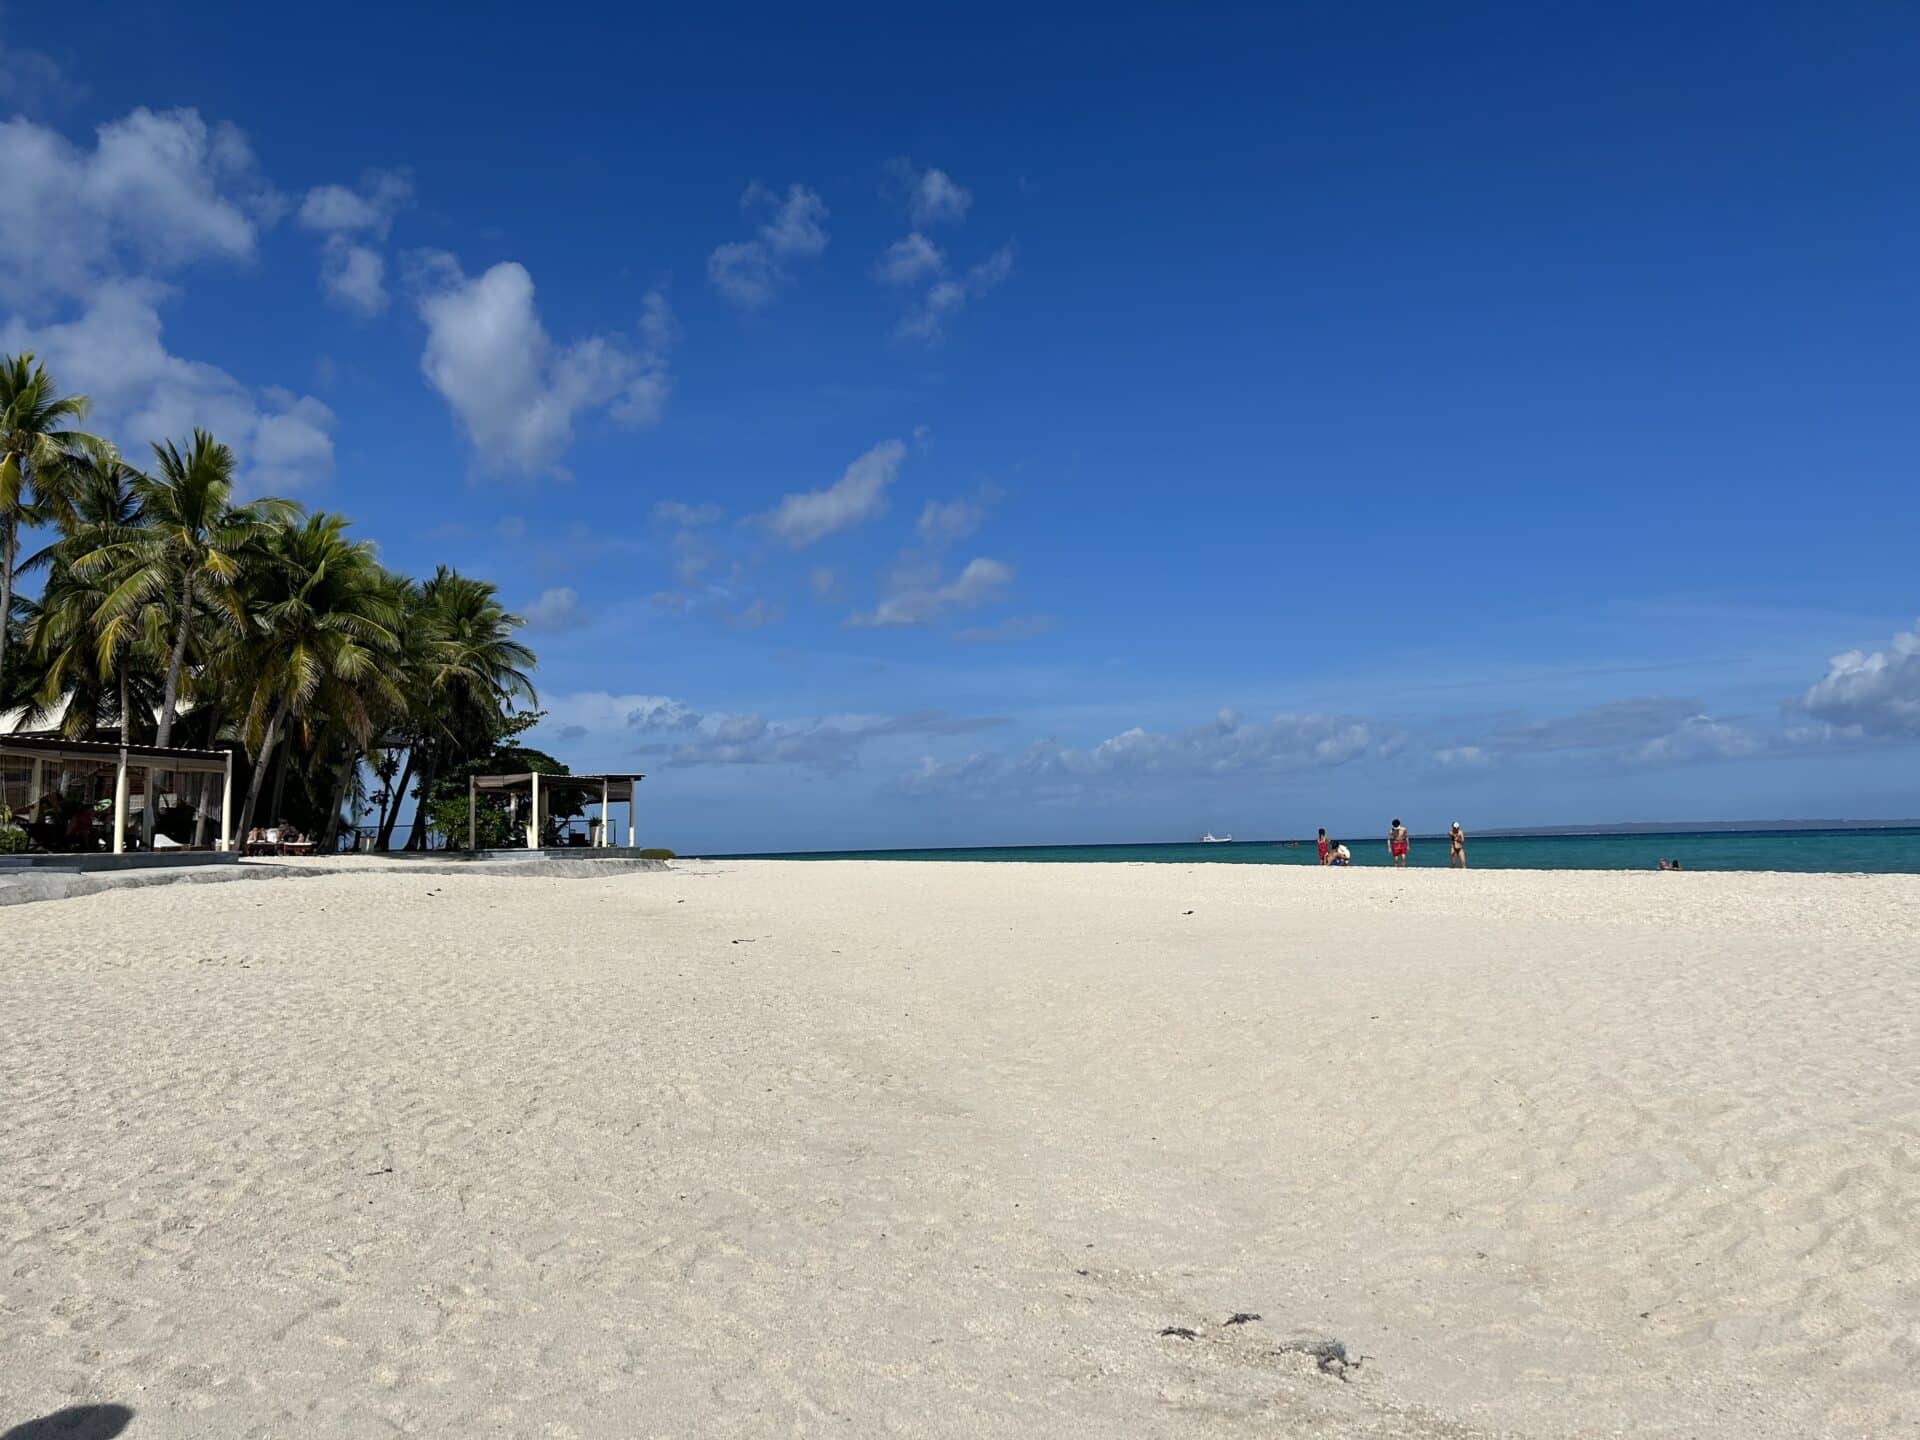 A beach with white sand and blue sky.